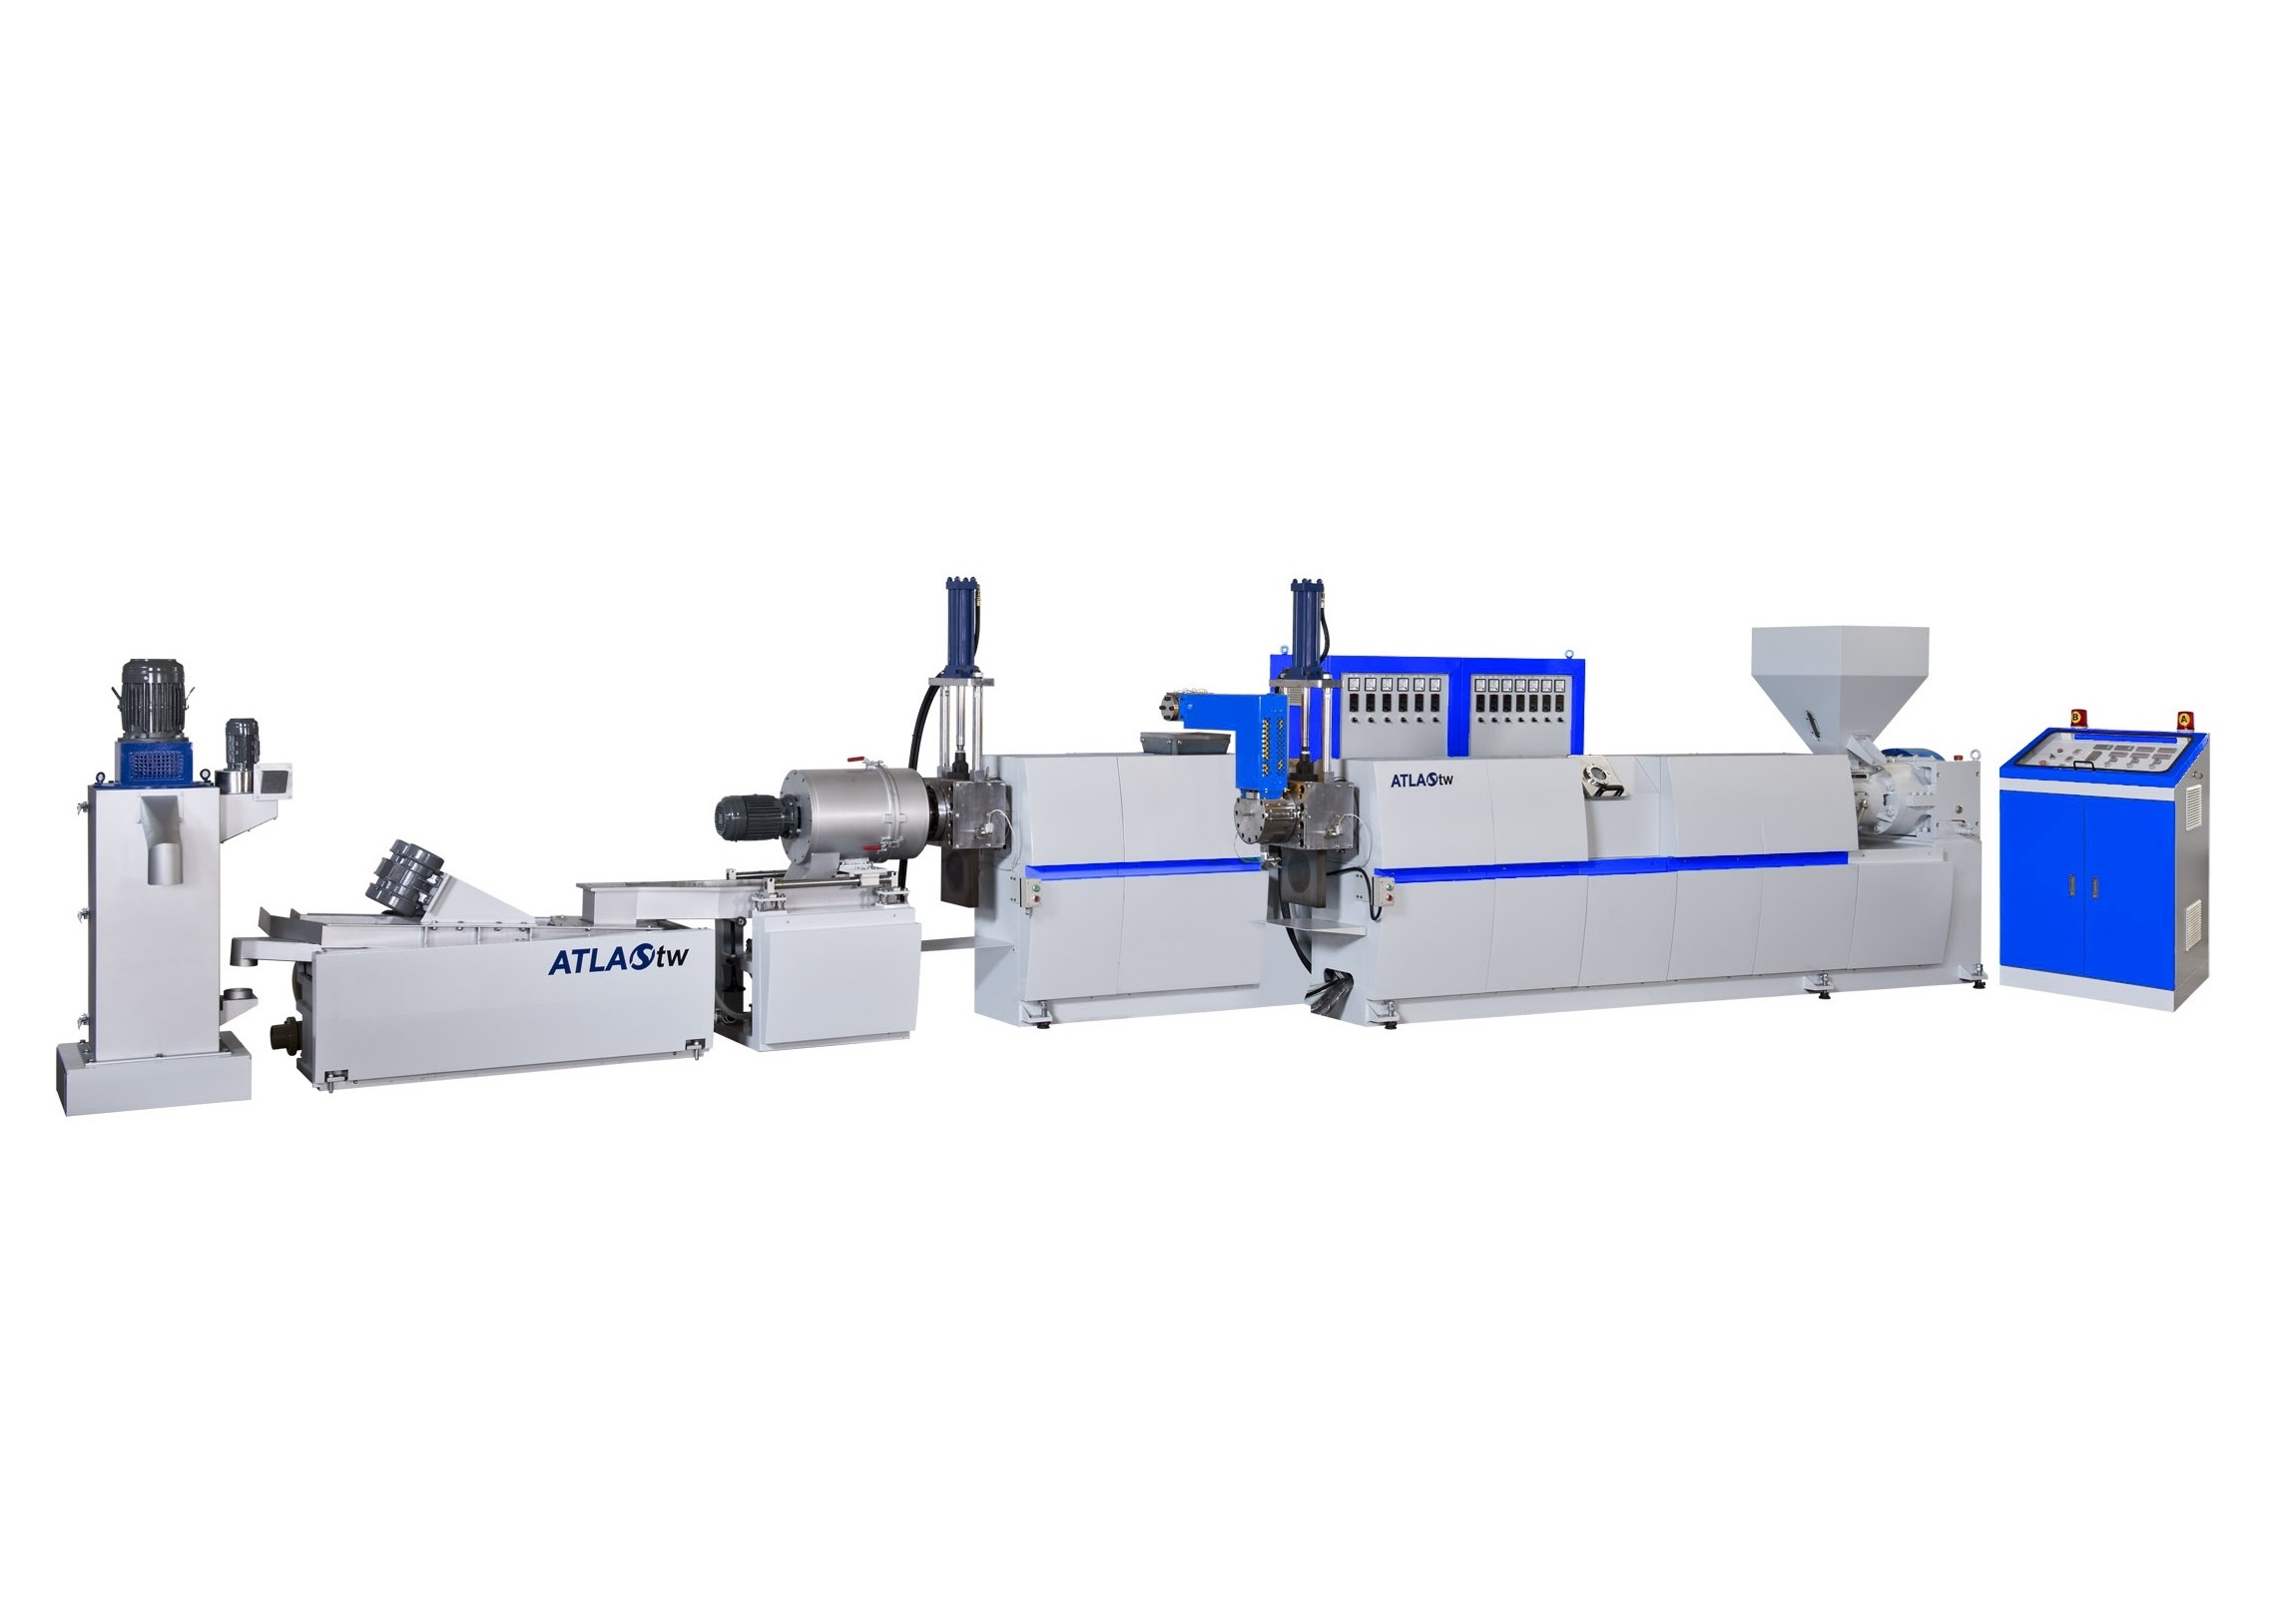 Two Stage Hopper Feeding & Die Face Cutting Plastic Recycling Machine is designed and built mainly for recycling hard crushed plastics and injection materials. Equipped with two extruders, the two-stage model is more capable of filtering dirts and heavy printing inks out of the materials.